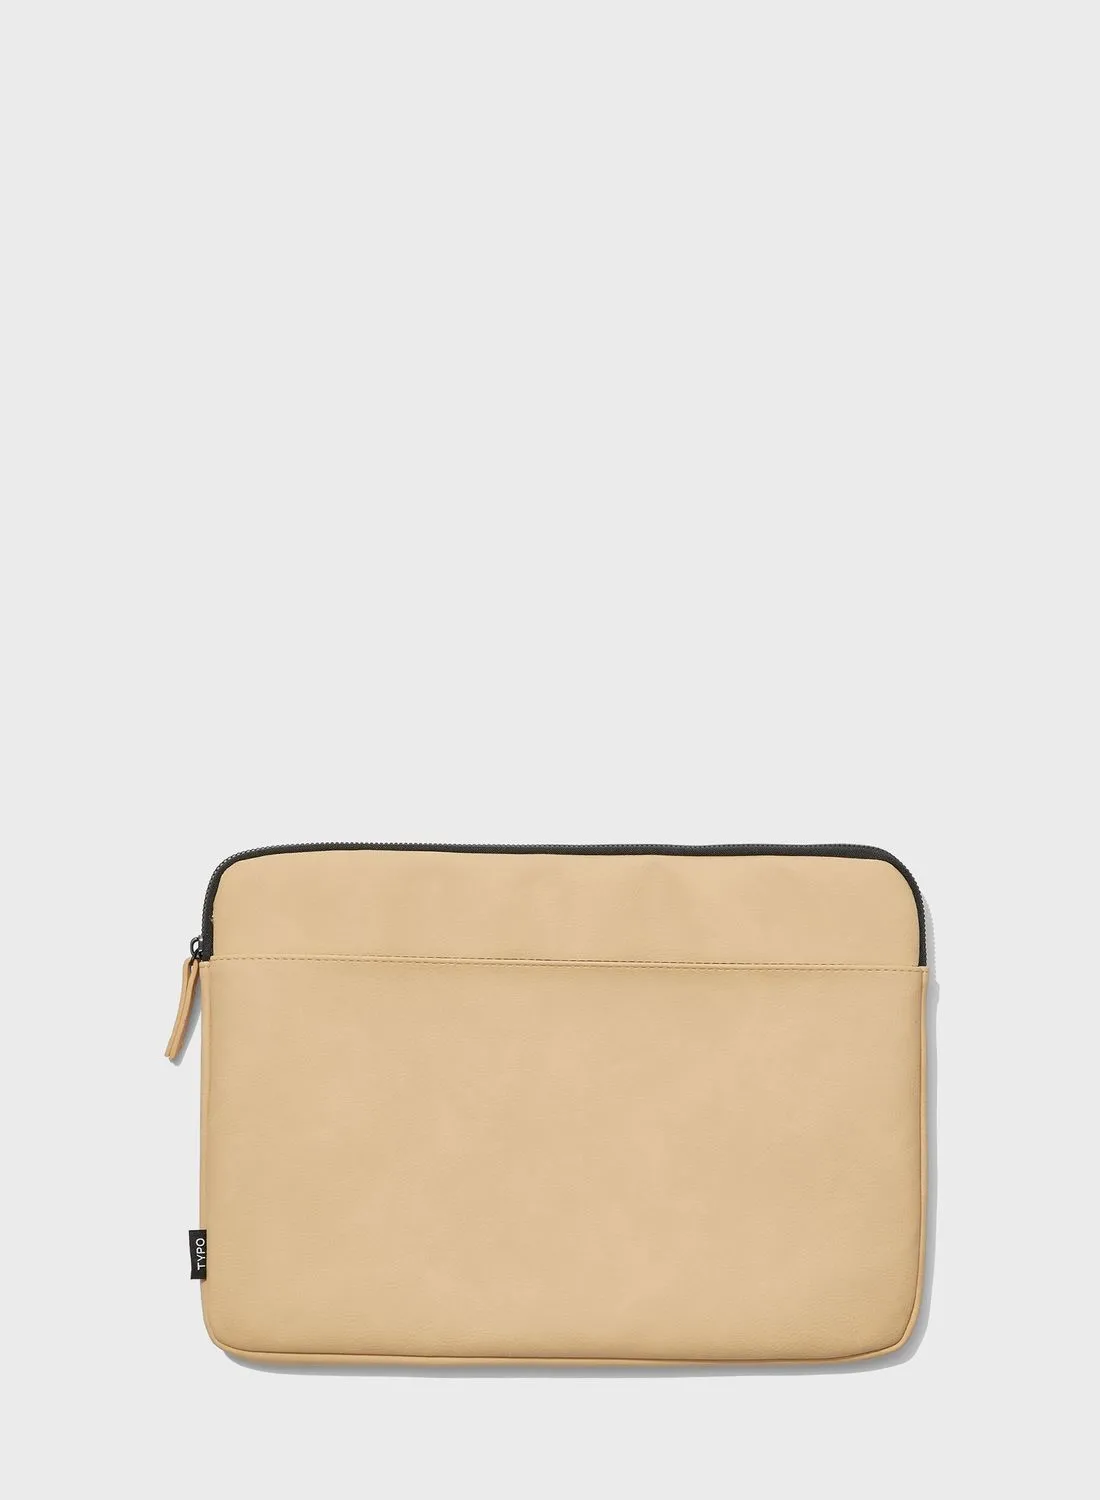 Typo Core Laptop Cover 13 Inch